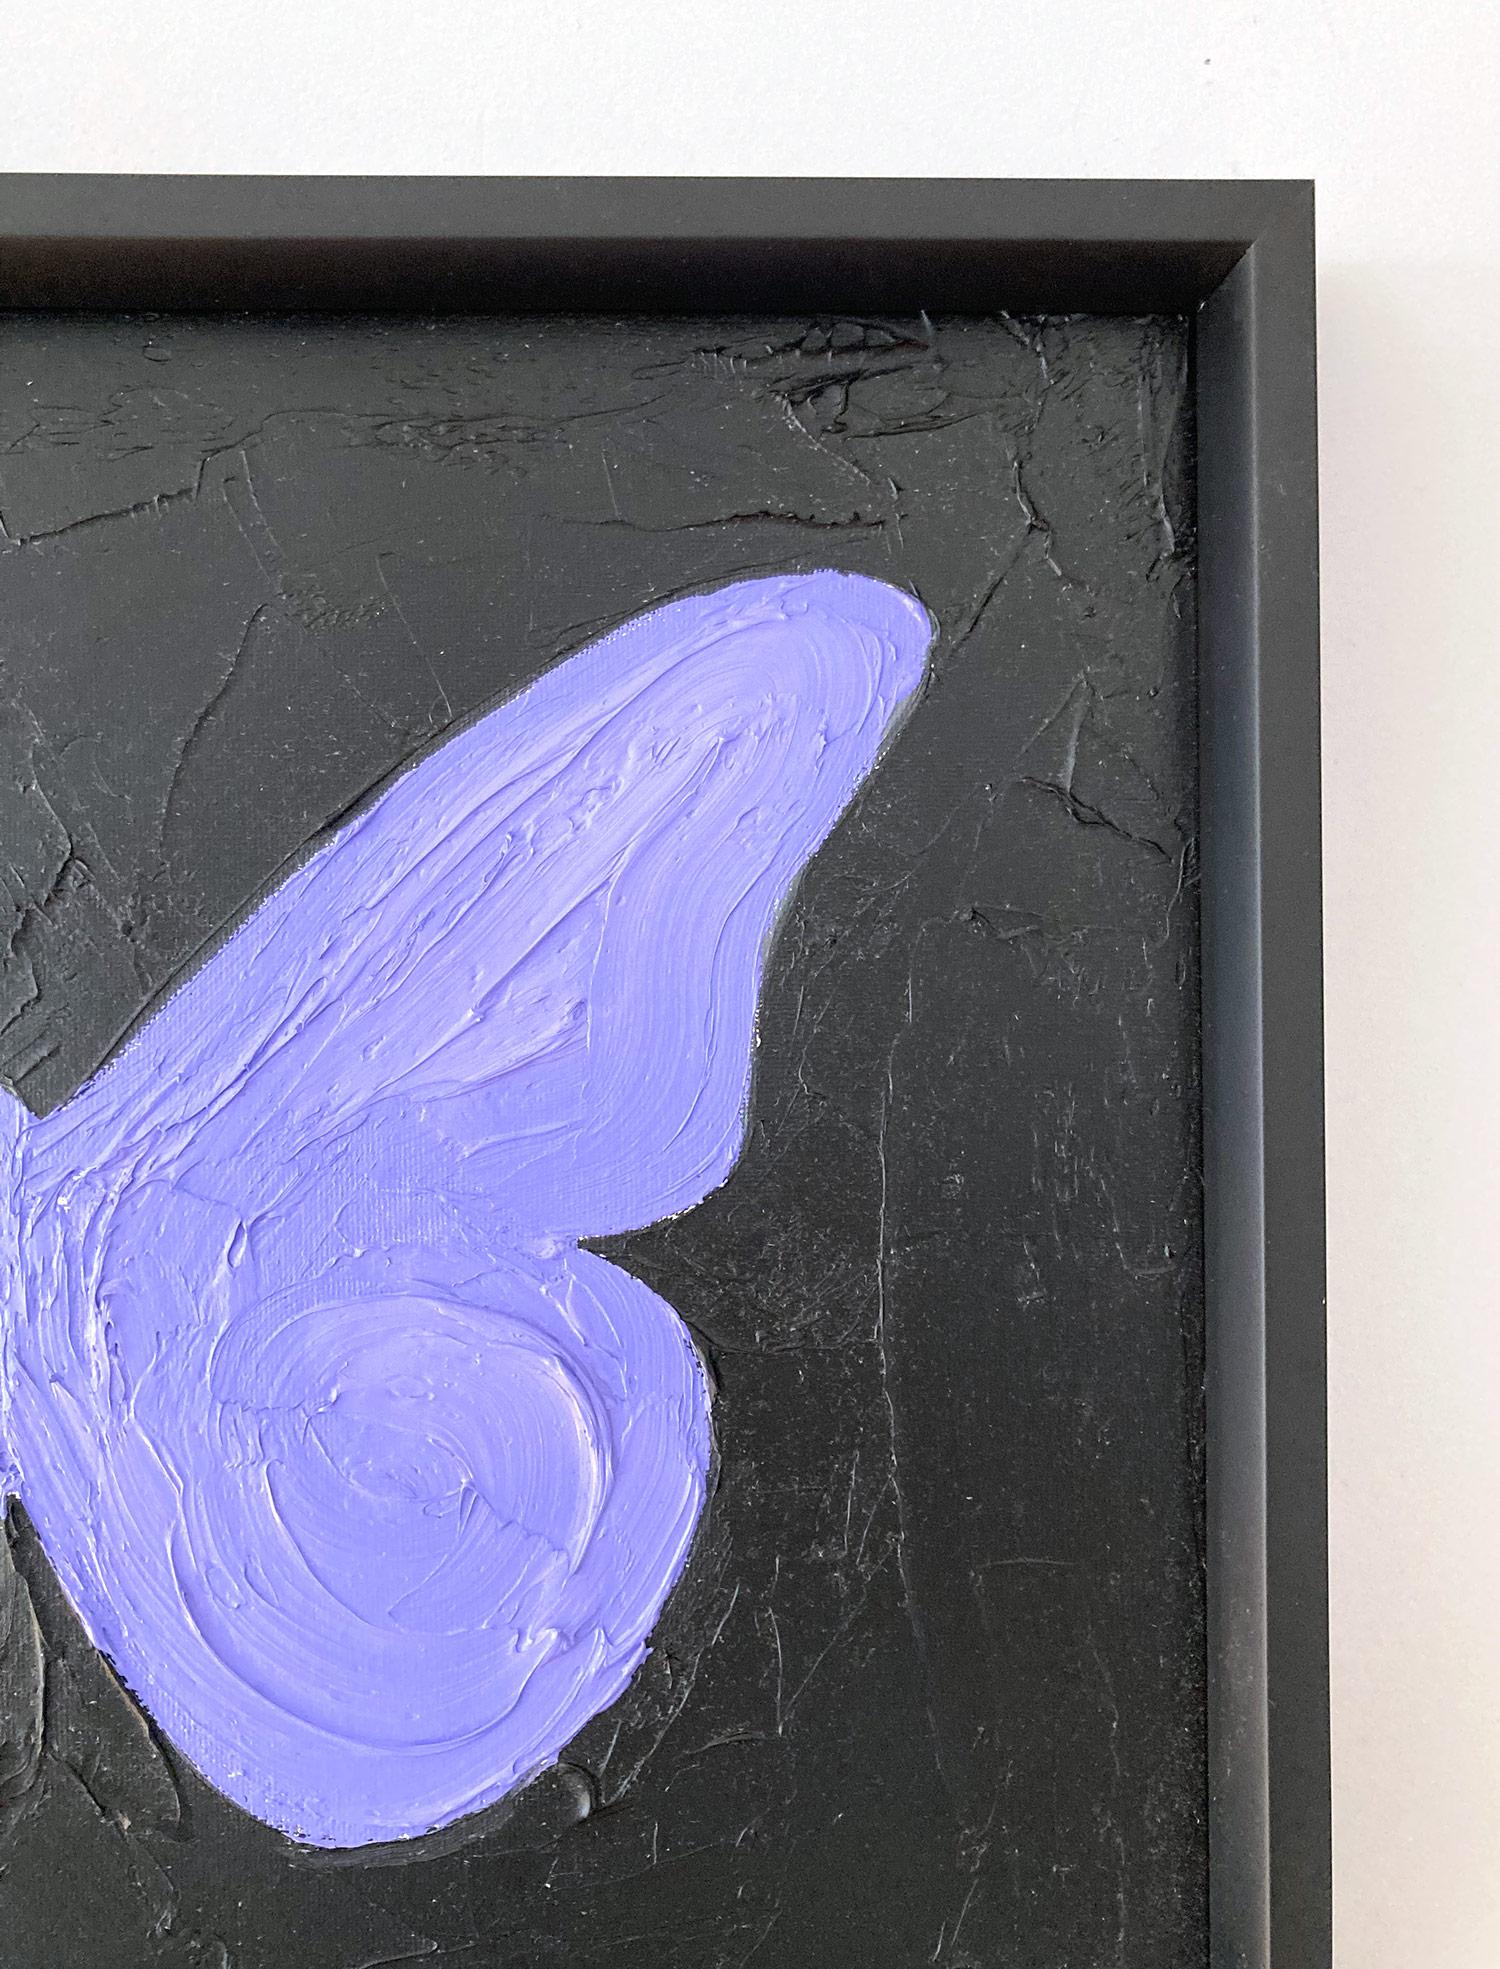 Motivated by bold color and fast brushwork, we are moved by the simplicity and thick textured oil paints in these works. Shaoul’s “My Butterfly Collection” is a vibrant and energetic display of transformation encapsulated in these playful